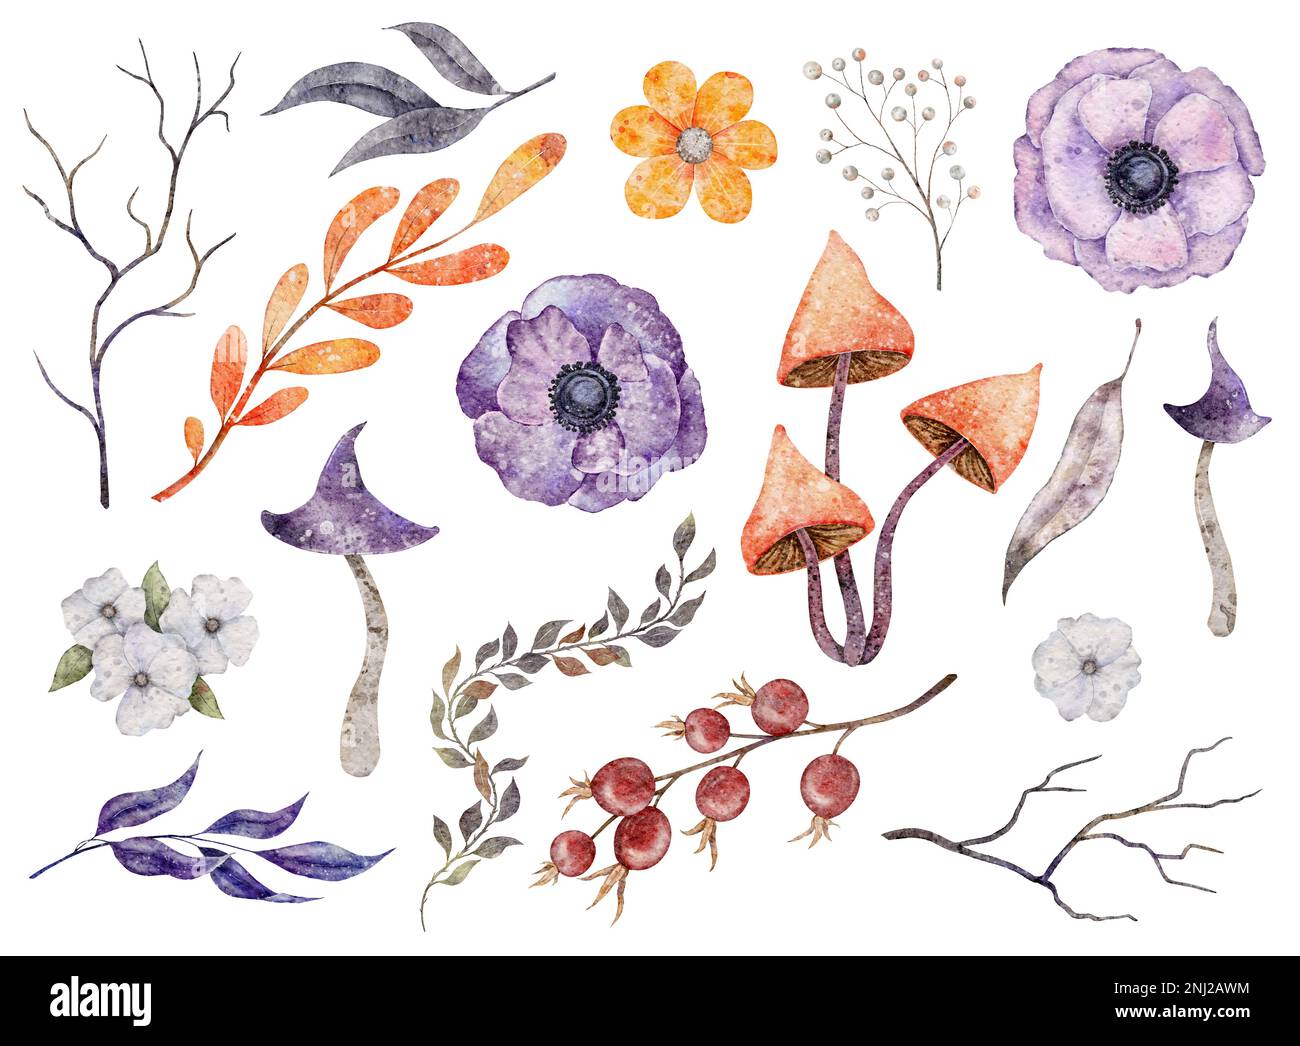 Watercolor floral clipart with branches, anemone, mushroom, leaves, rosehip. Orange and Purple color Stock Photo